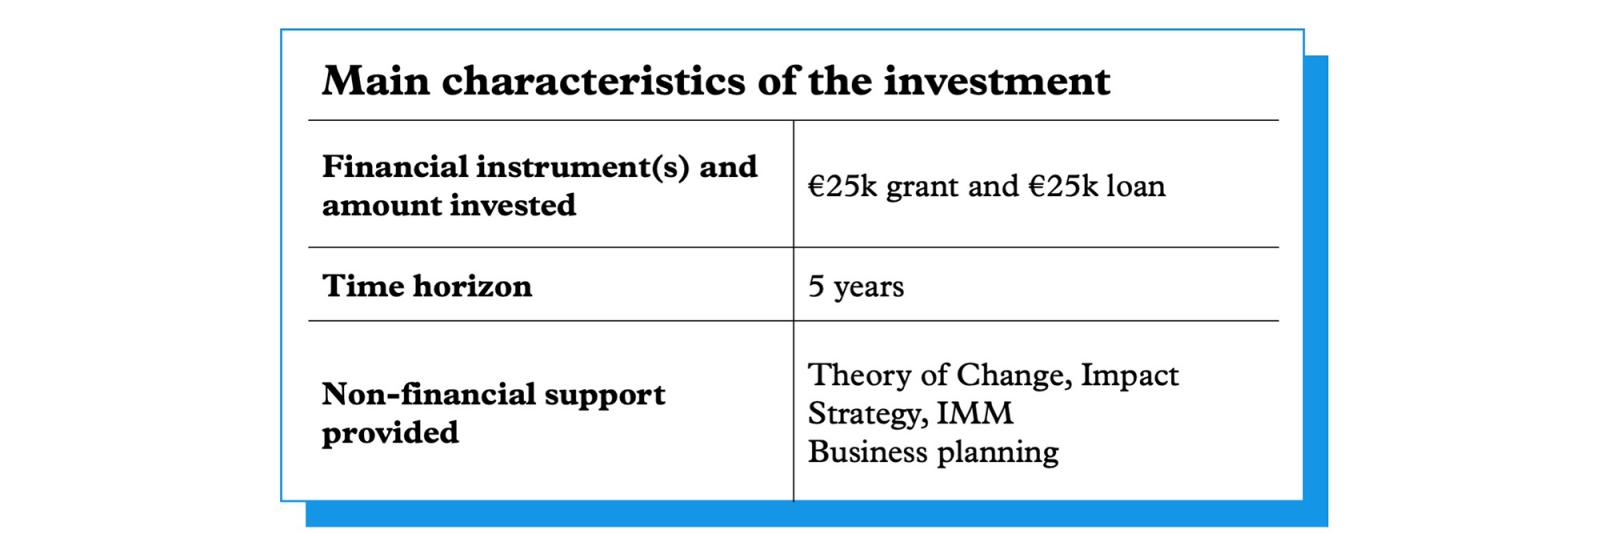 Main Characteristics of the investment